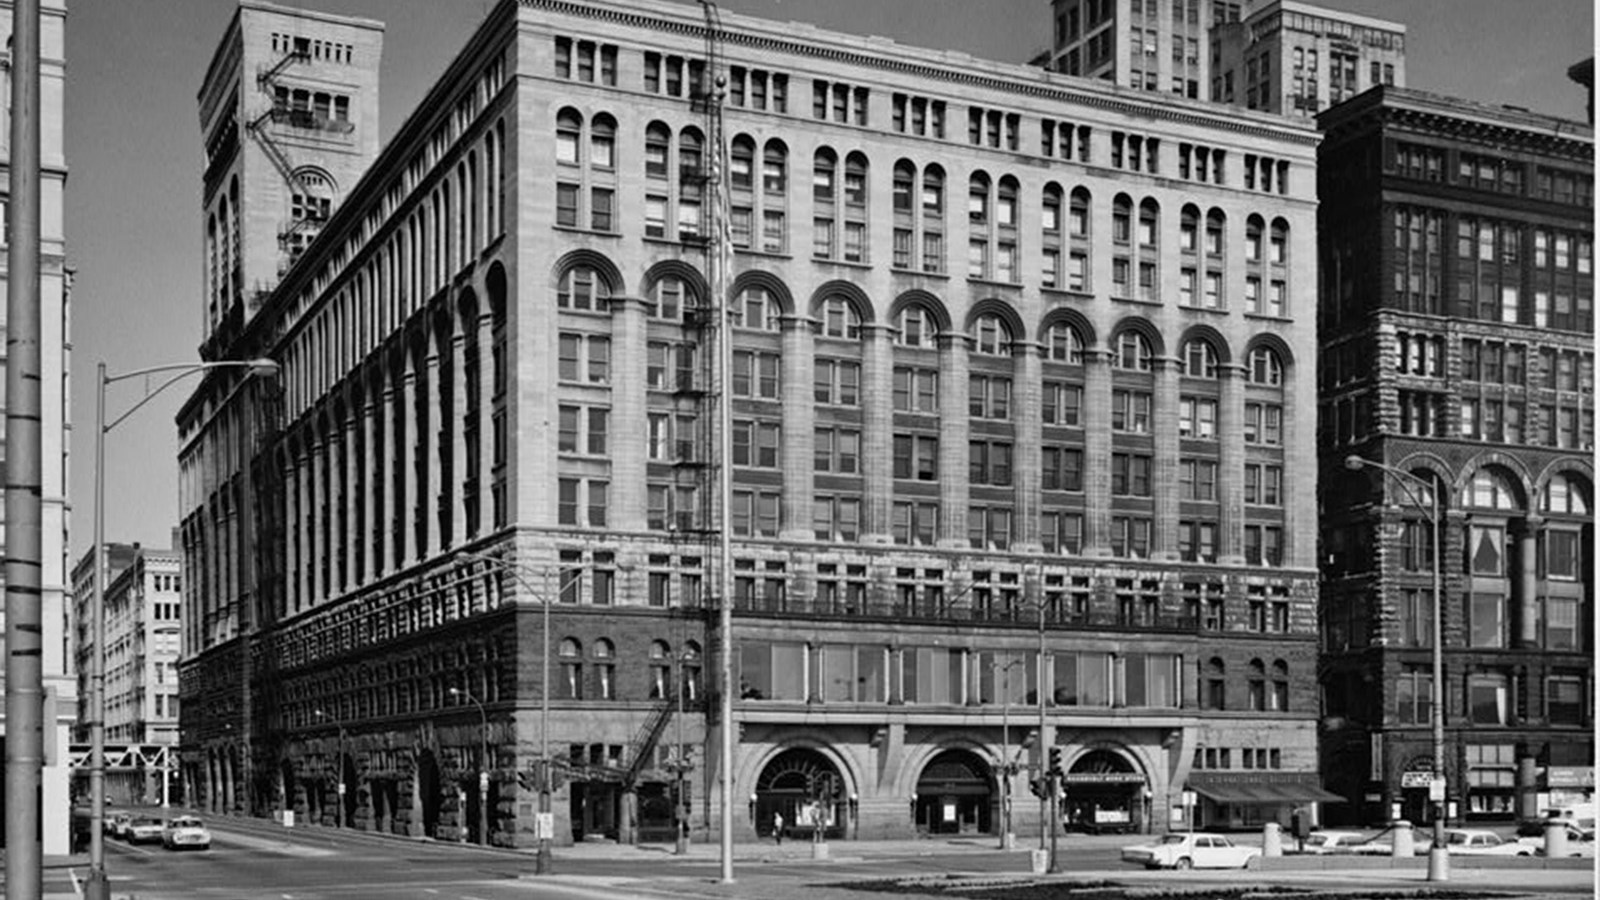 Exterior view of the Auditorium Theater showing multiple windows. HABS, Library of Congress